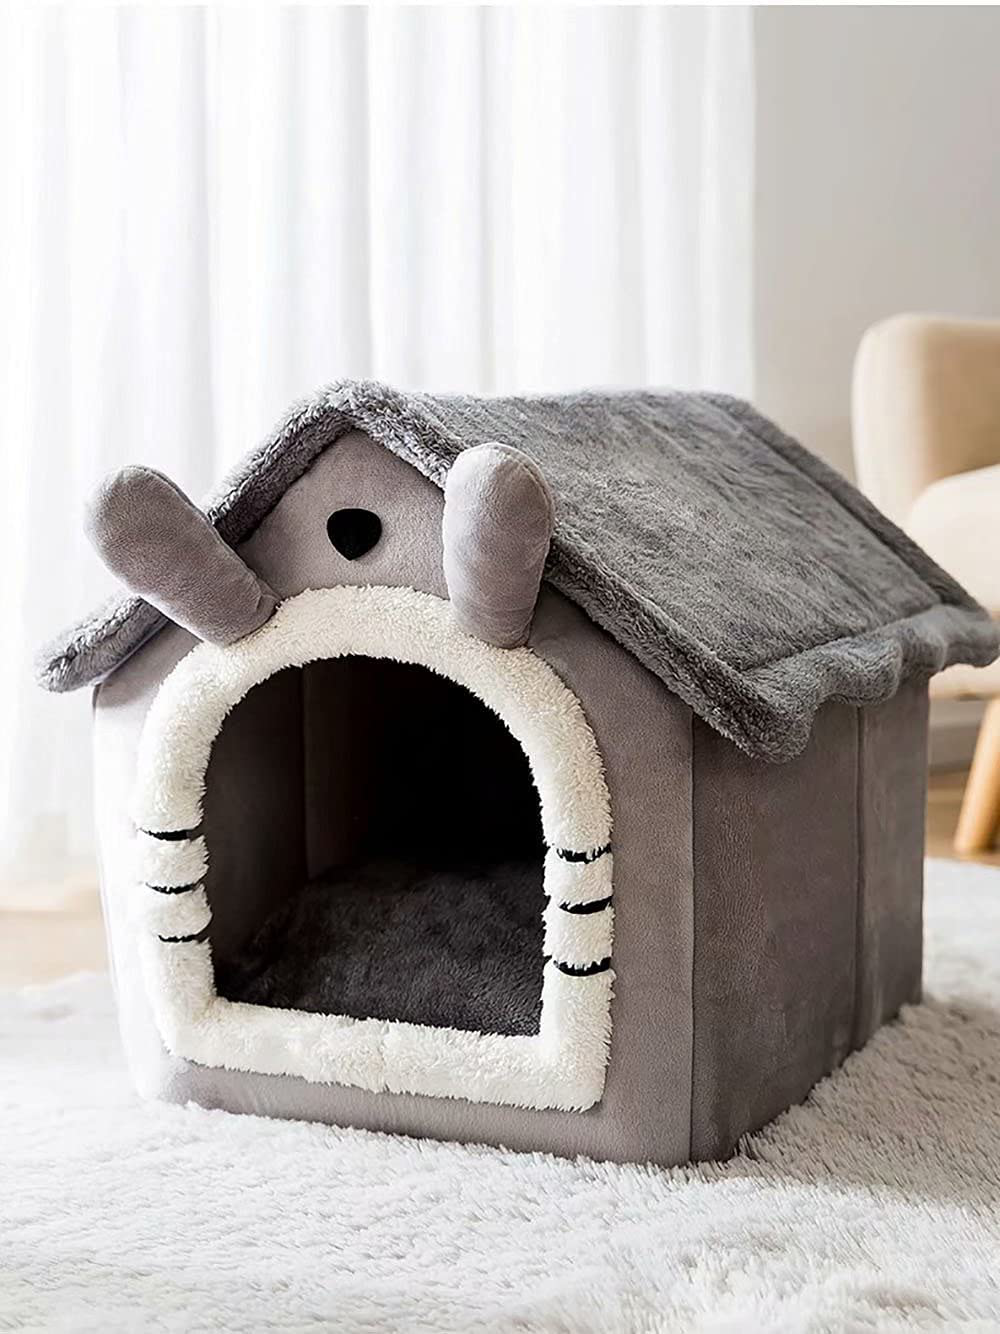 Dog House Kennel Soft Pet Bed Tent Indoor Enclosed Warm Plush Sleeping Nest Basket with Removable Cushion Travel Dog Accessory Coffee Animals & Pet Supplies > Pet Supplies > Dog Supplies > Dog Houses Petpany Gray Stars 3 L 19.3x15.4x18.2 inch 